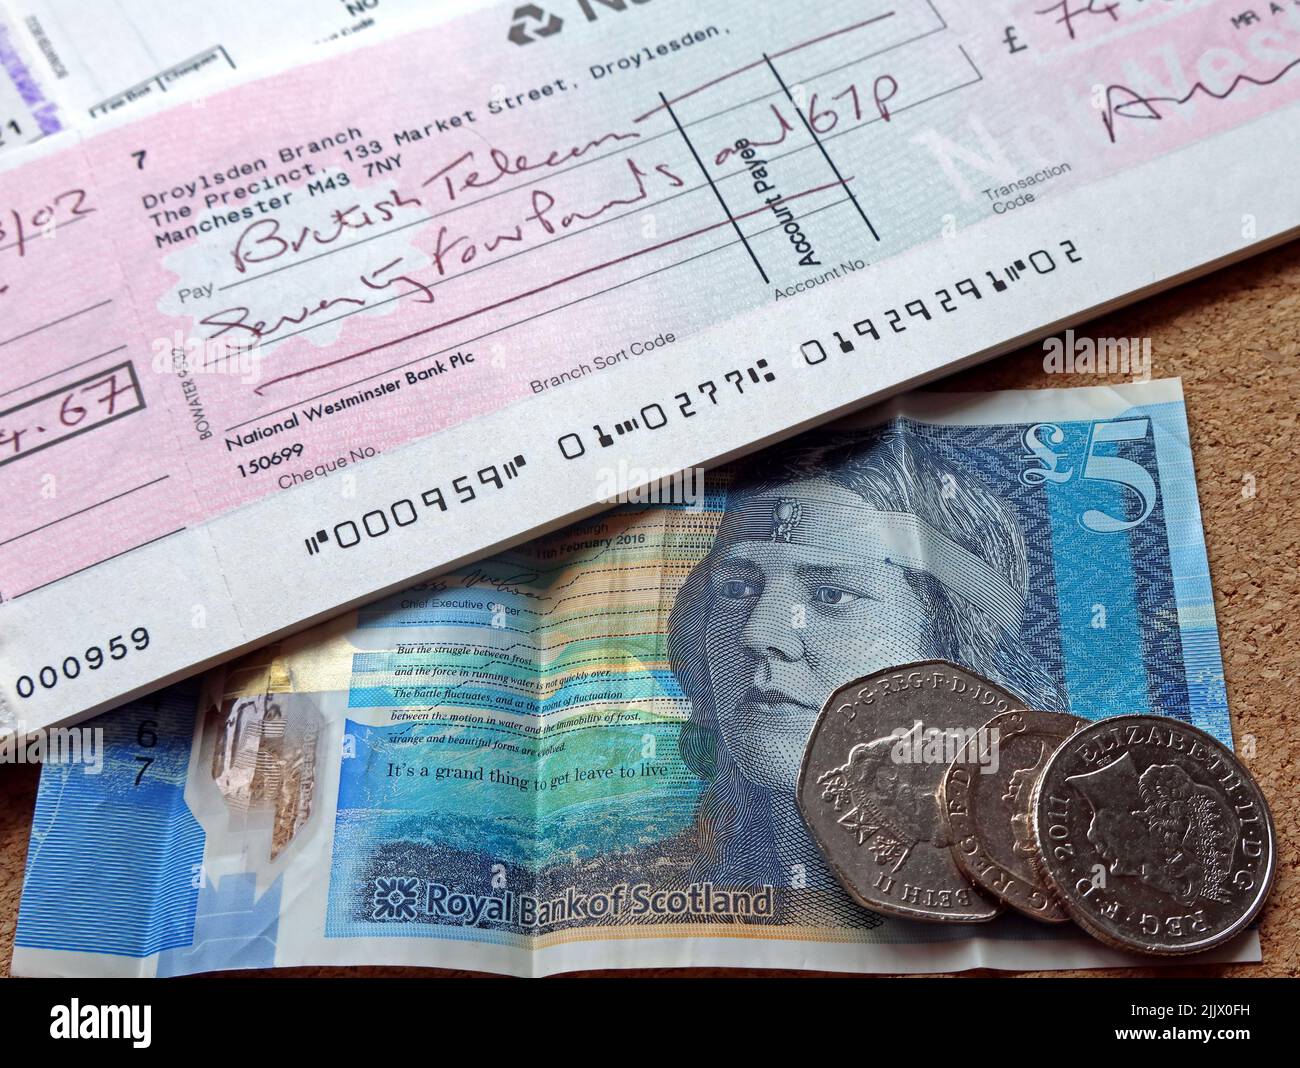 NatWest cheques, paying in slips, banking history - Scottish money / notes Stock Photo